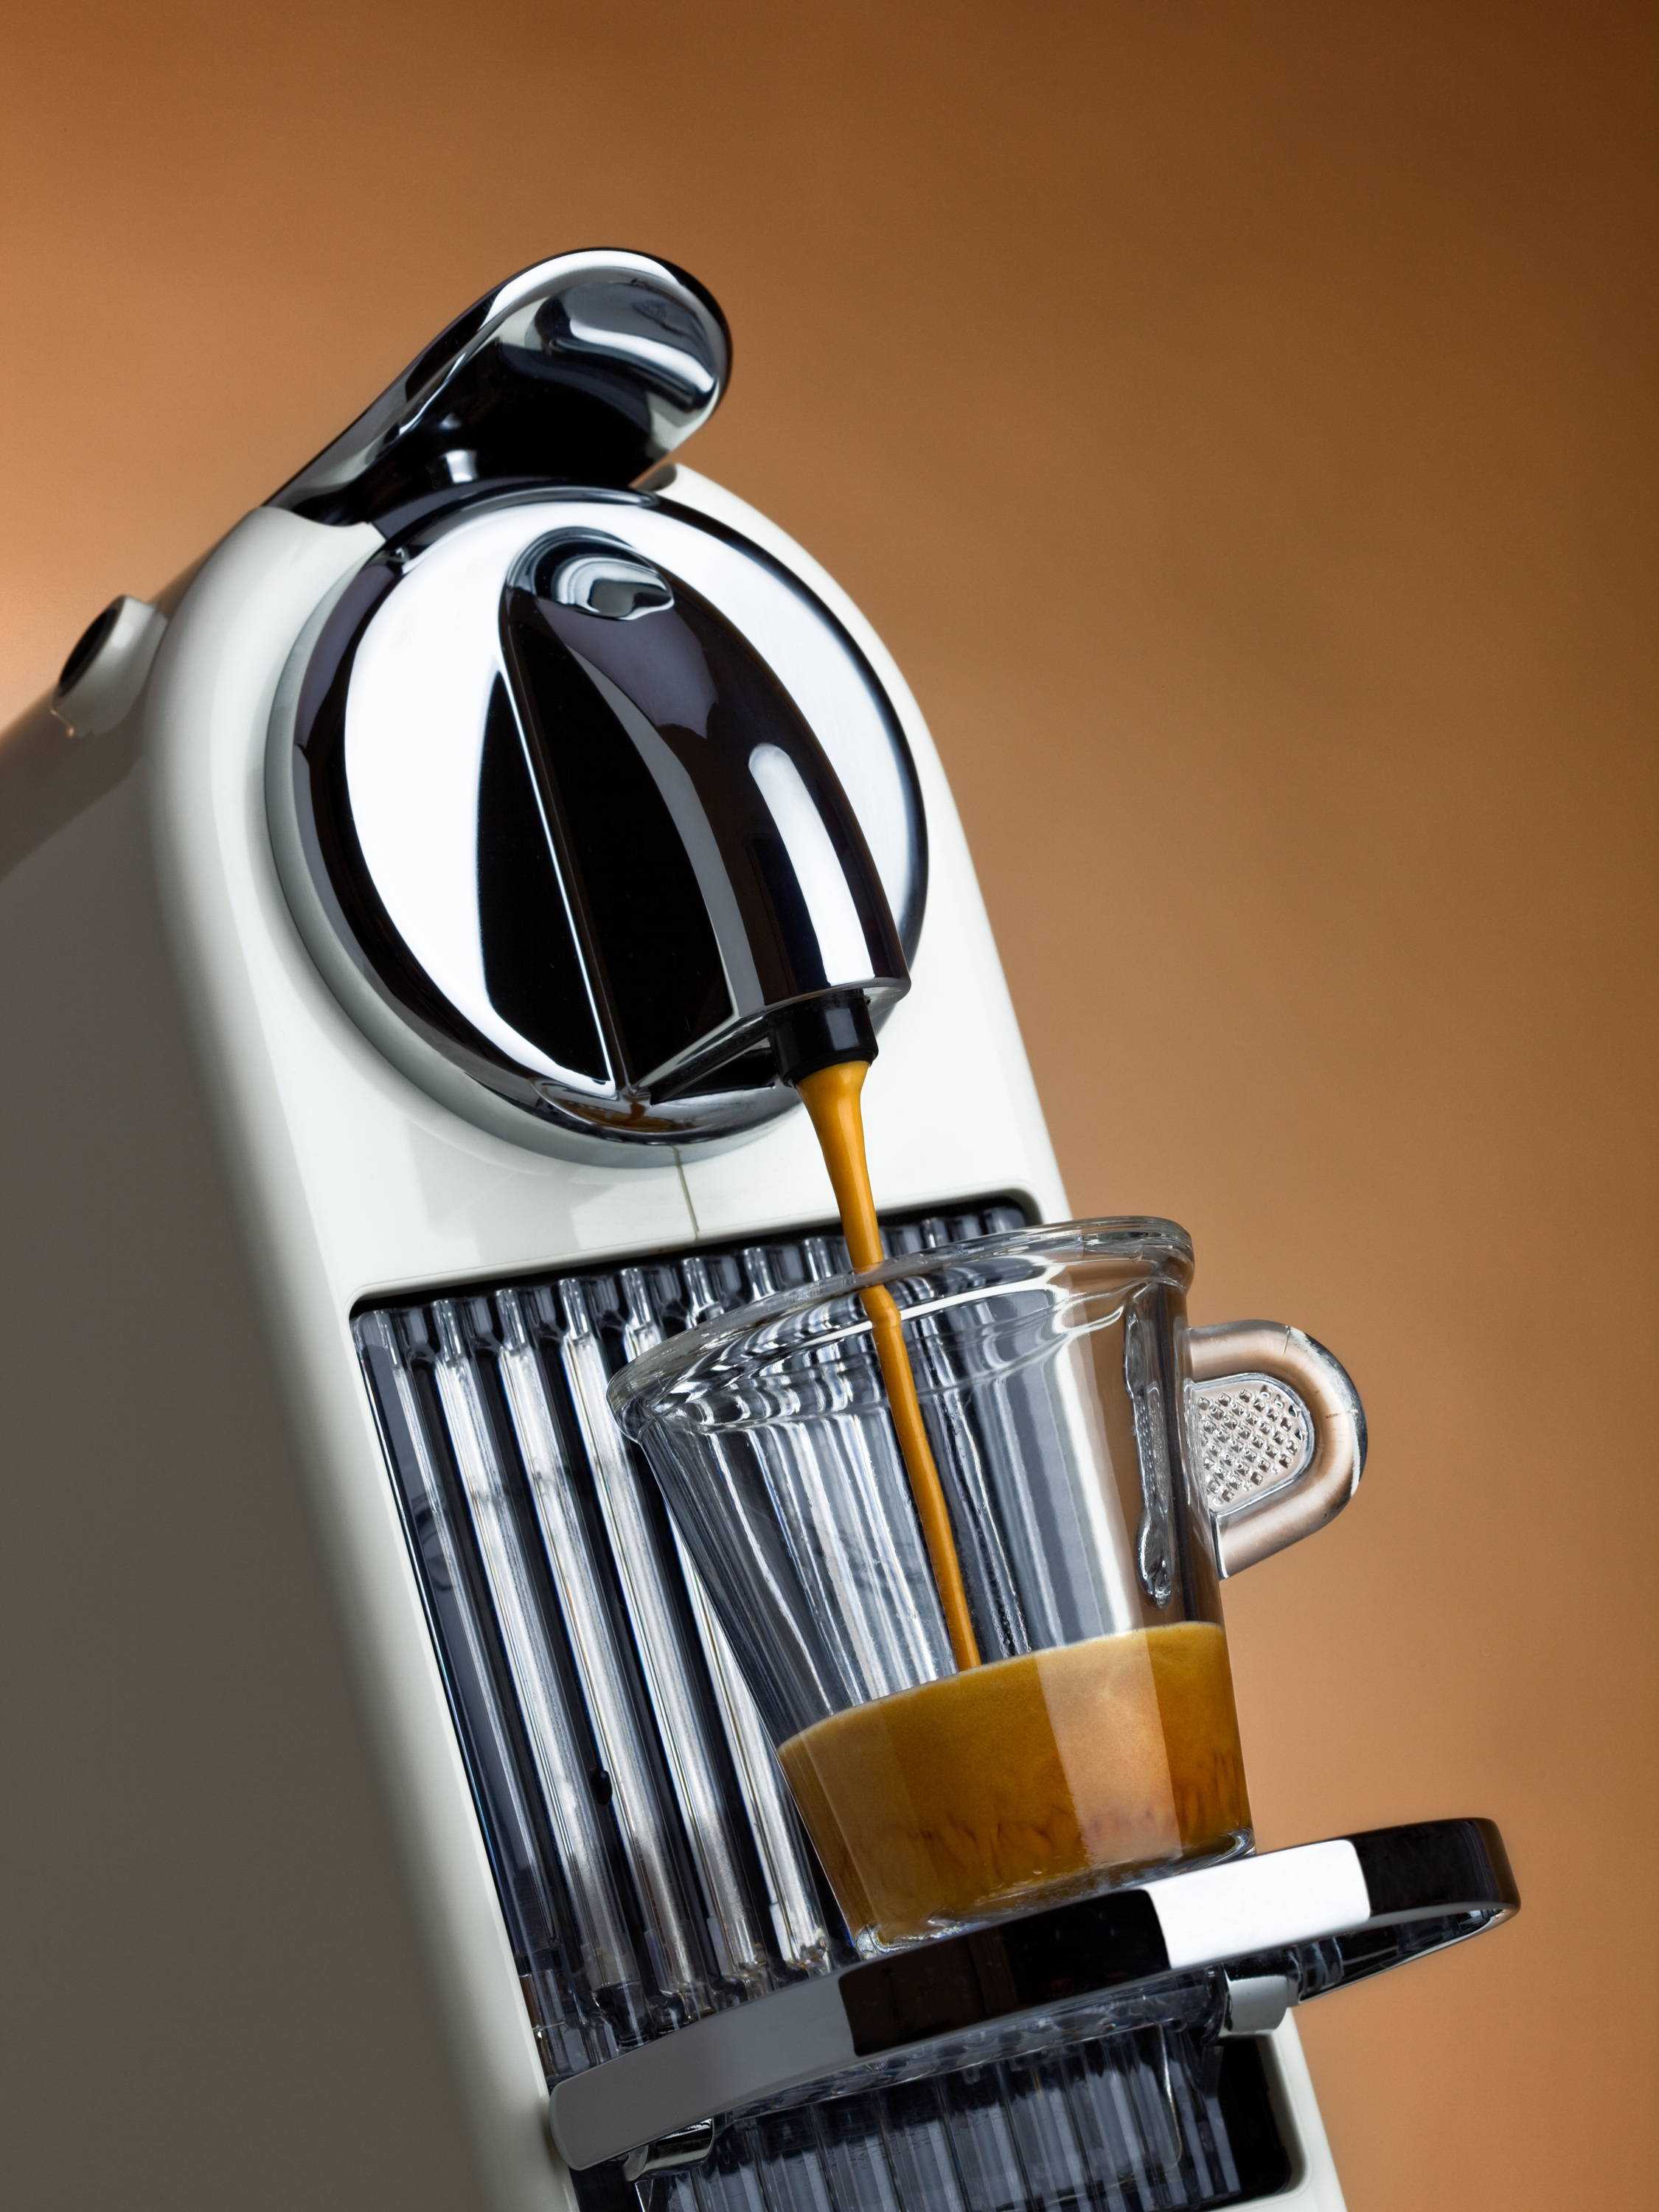 Cornwall permeabilitet surfing How to Reset and Program a Nespresso Machine - Gourmesso Coffee